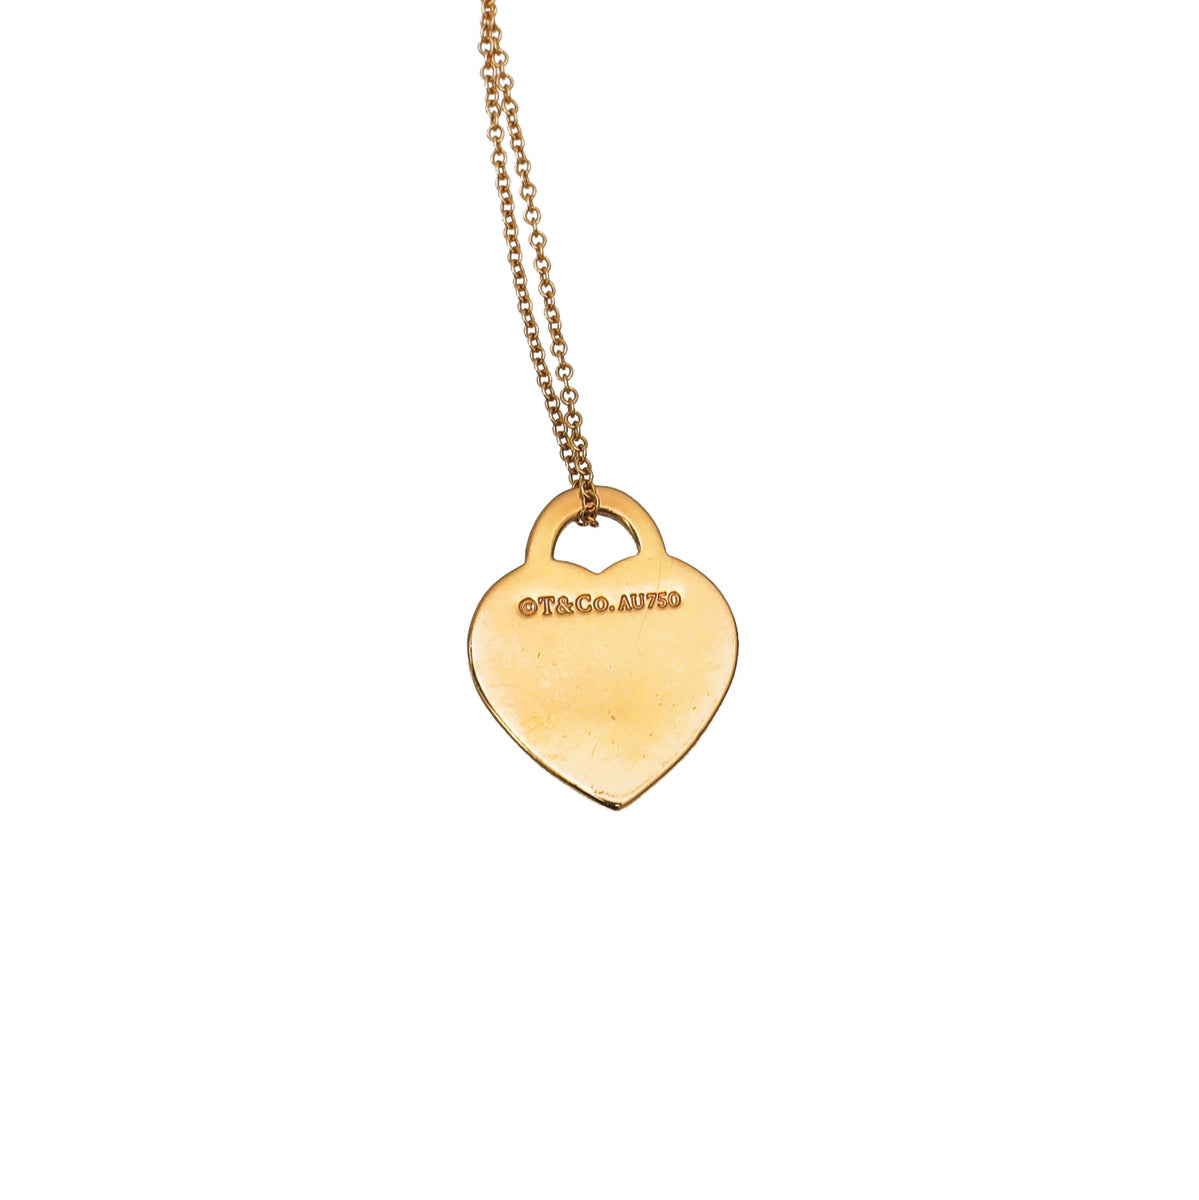 Tiffany & Co 18K Yellow Gold Heart Tag Pendant Necklace